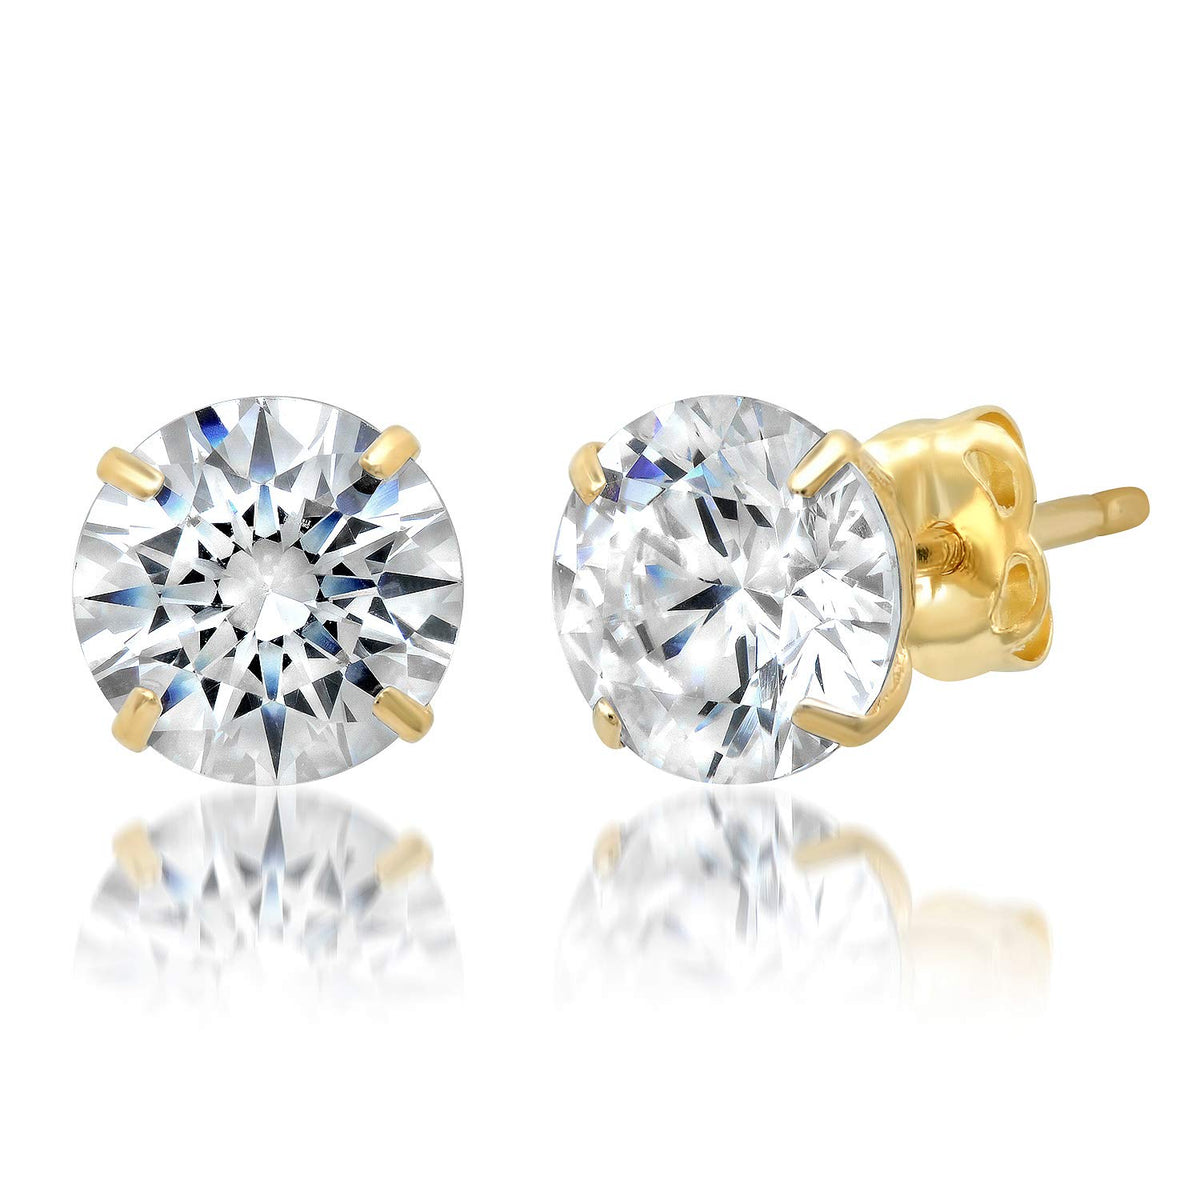 14k Yellow Gold Round Cut White Cubic Zirconia Stud Earrings fine designer jewelry for men and women